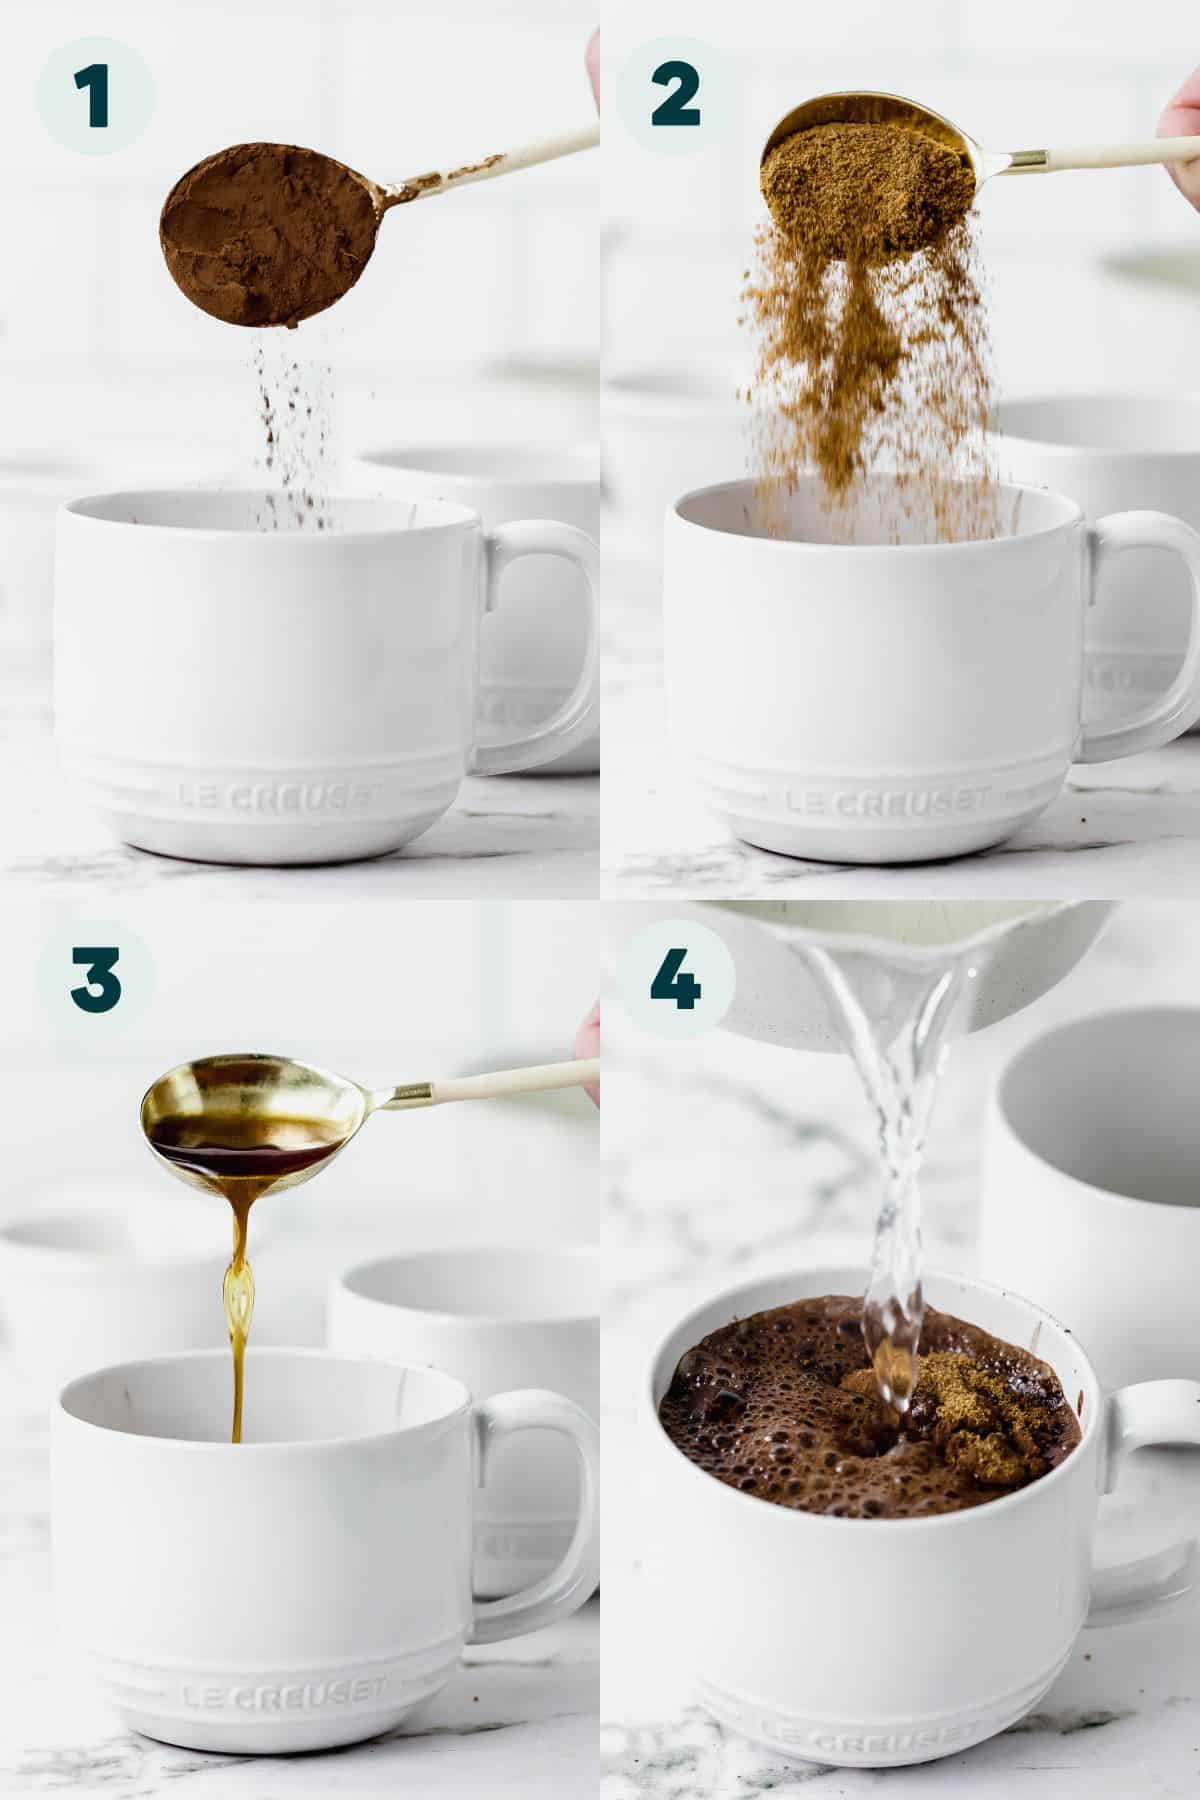 4 step by step photos showing how to make a mug of hot chocolate with cocoa powder step by step.